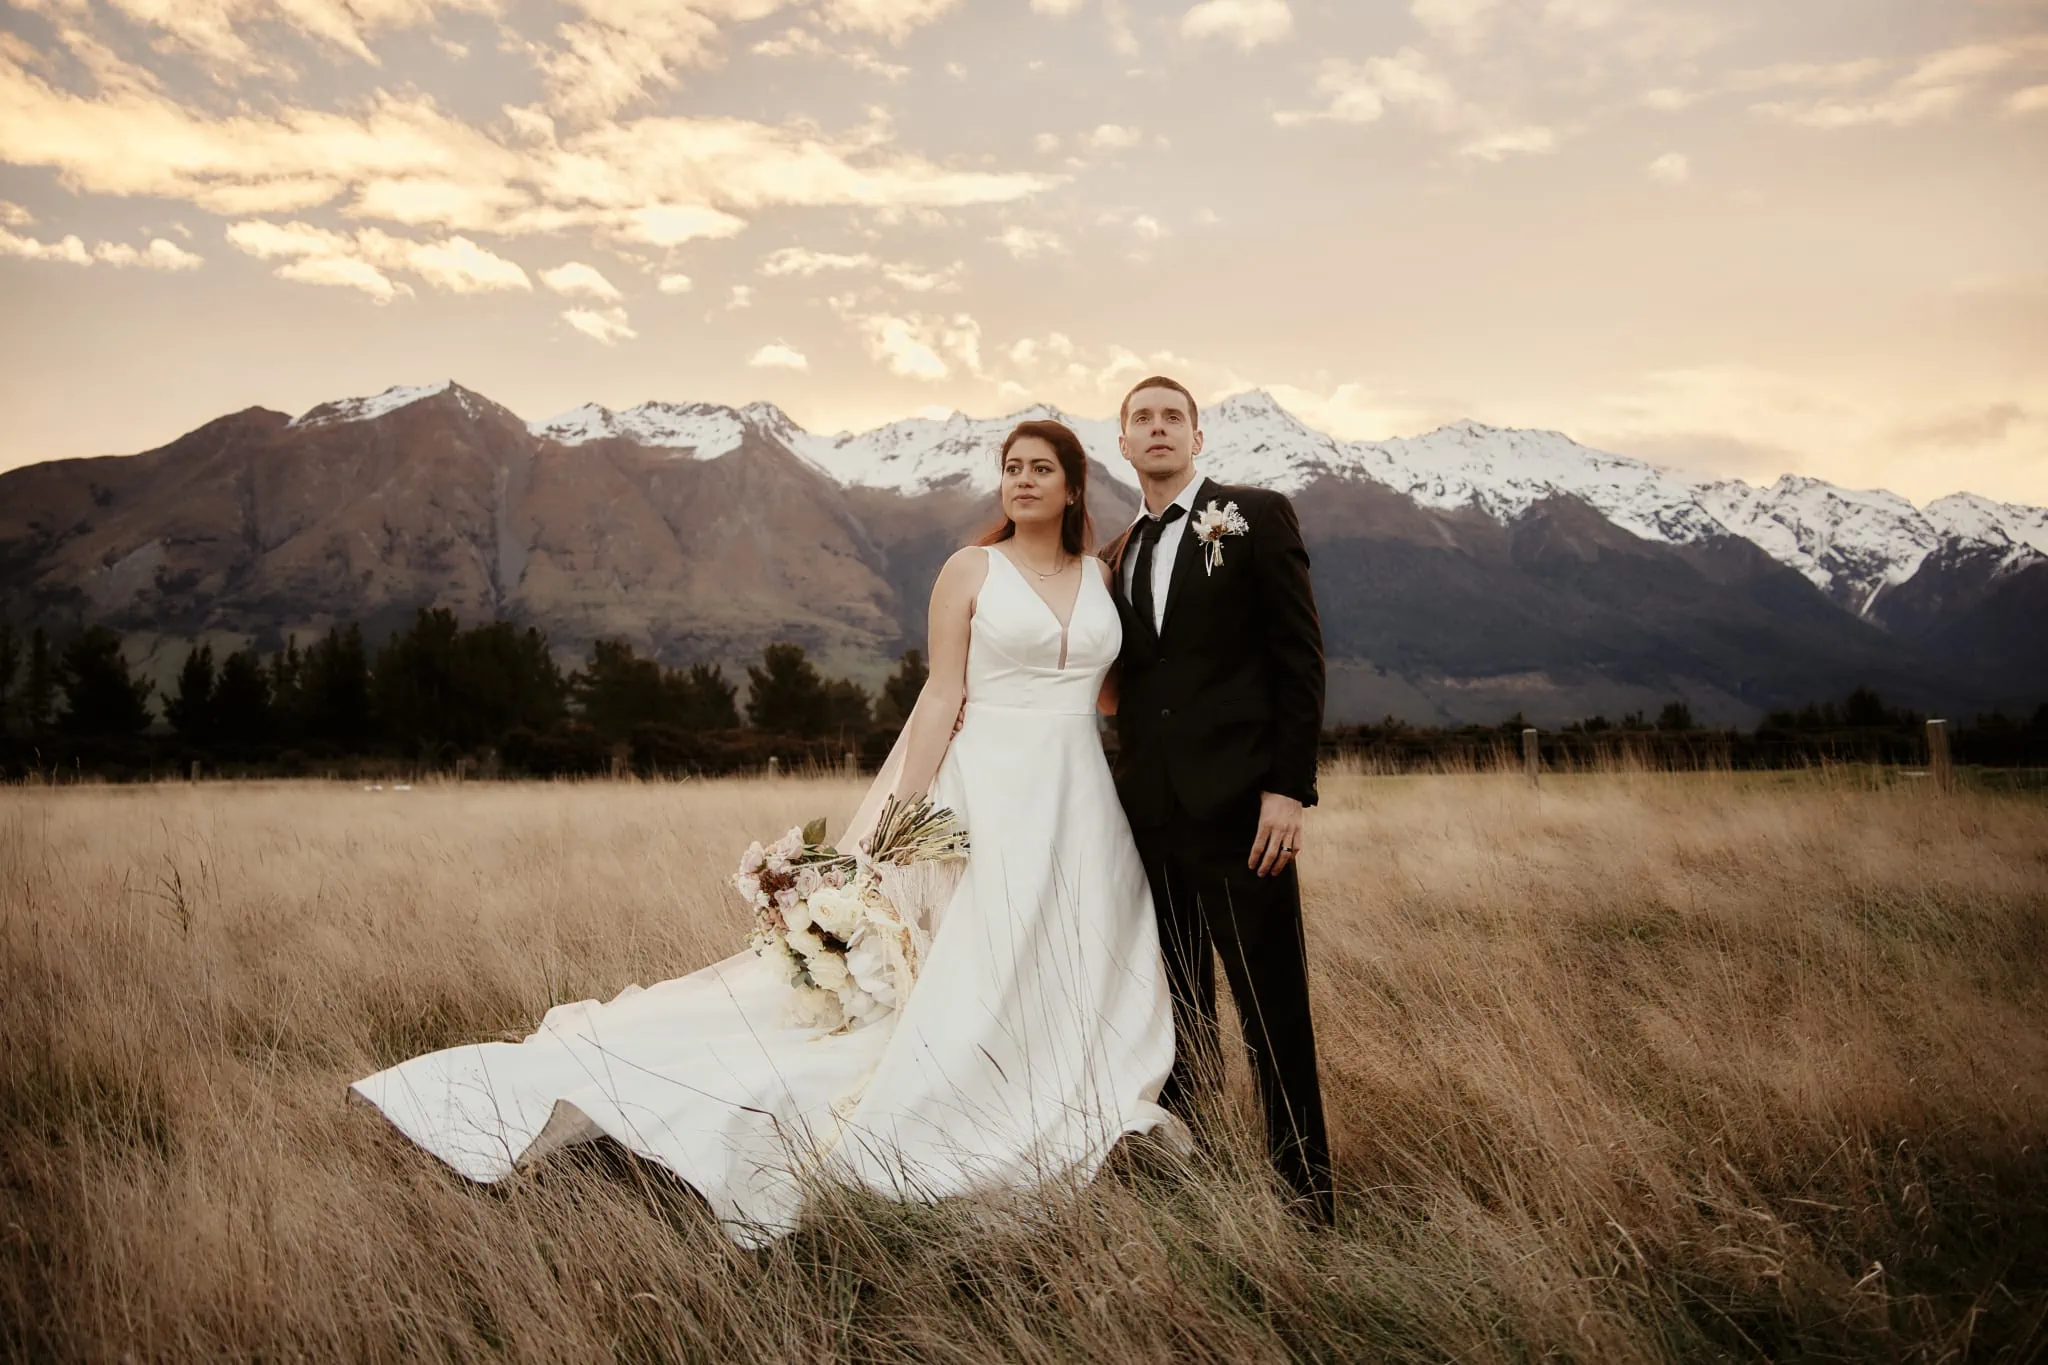 Michelle and Vedran's elopement wedding at Rees Valley Station, with mountains in the background.